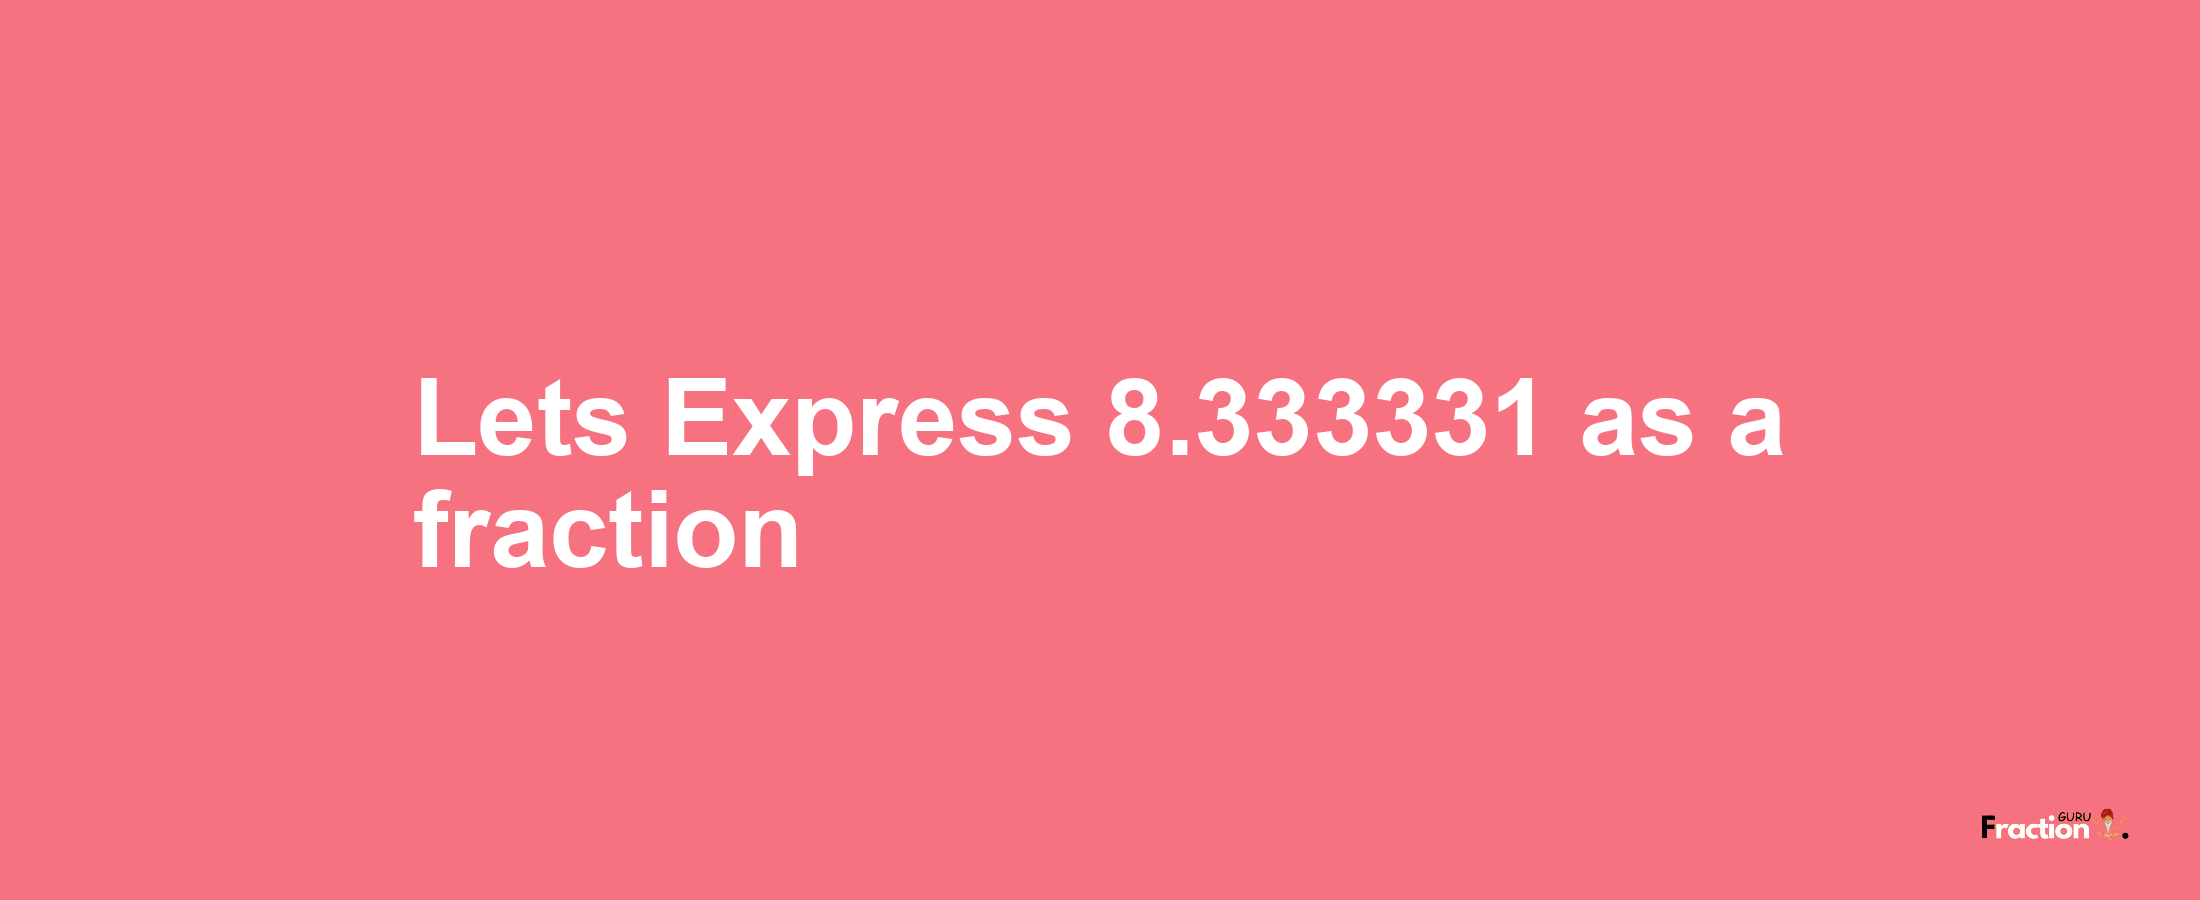 Lets Express 8.333331 as afraction